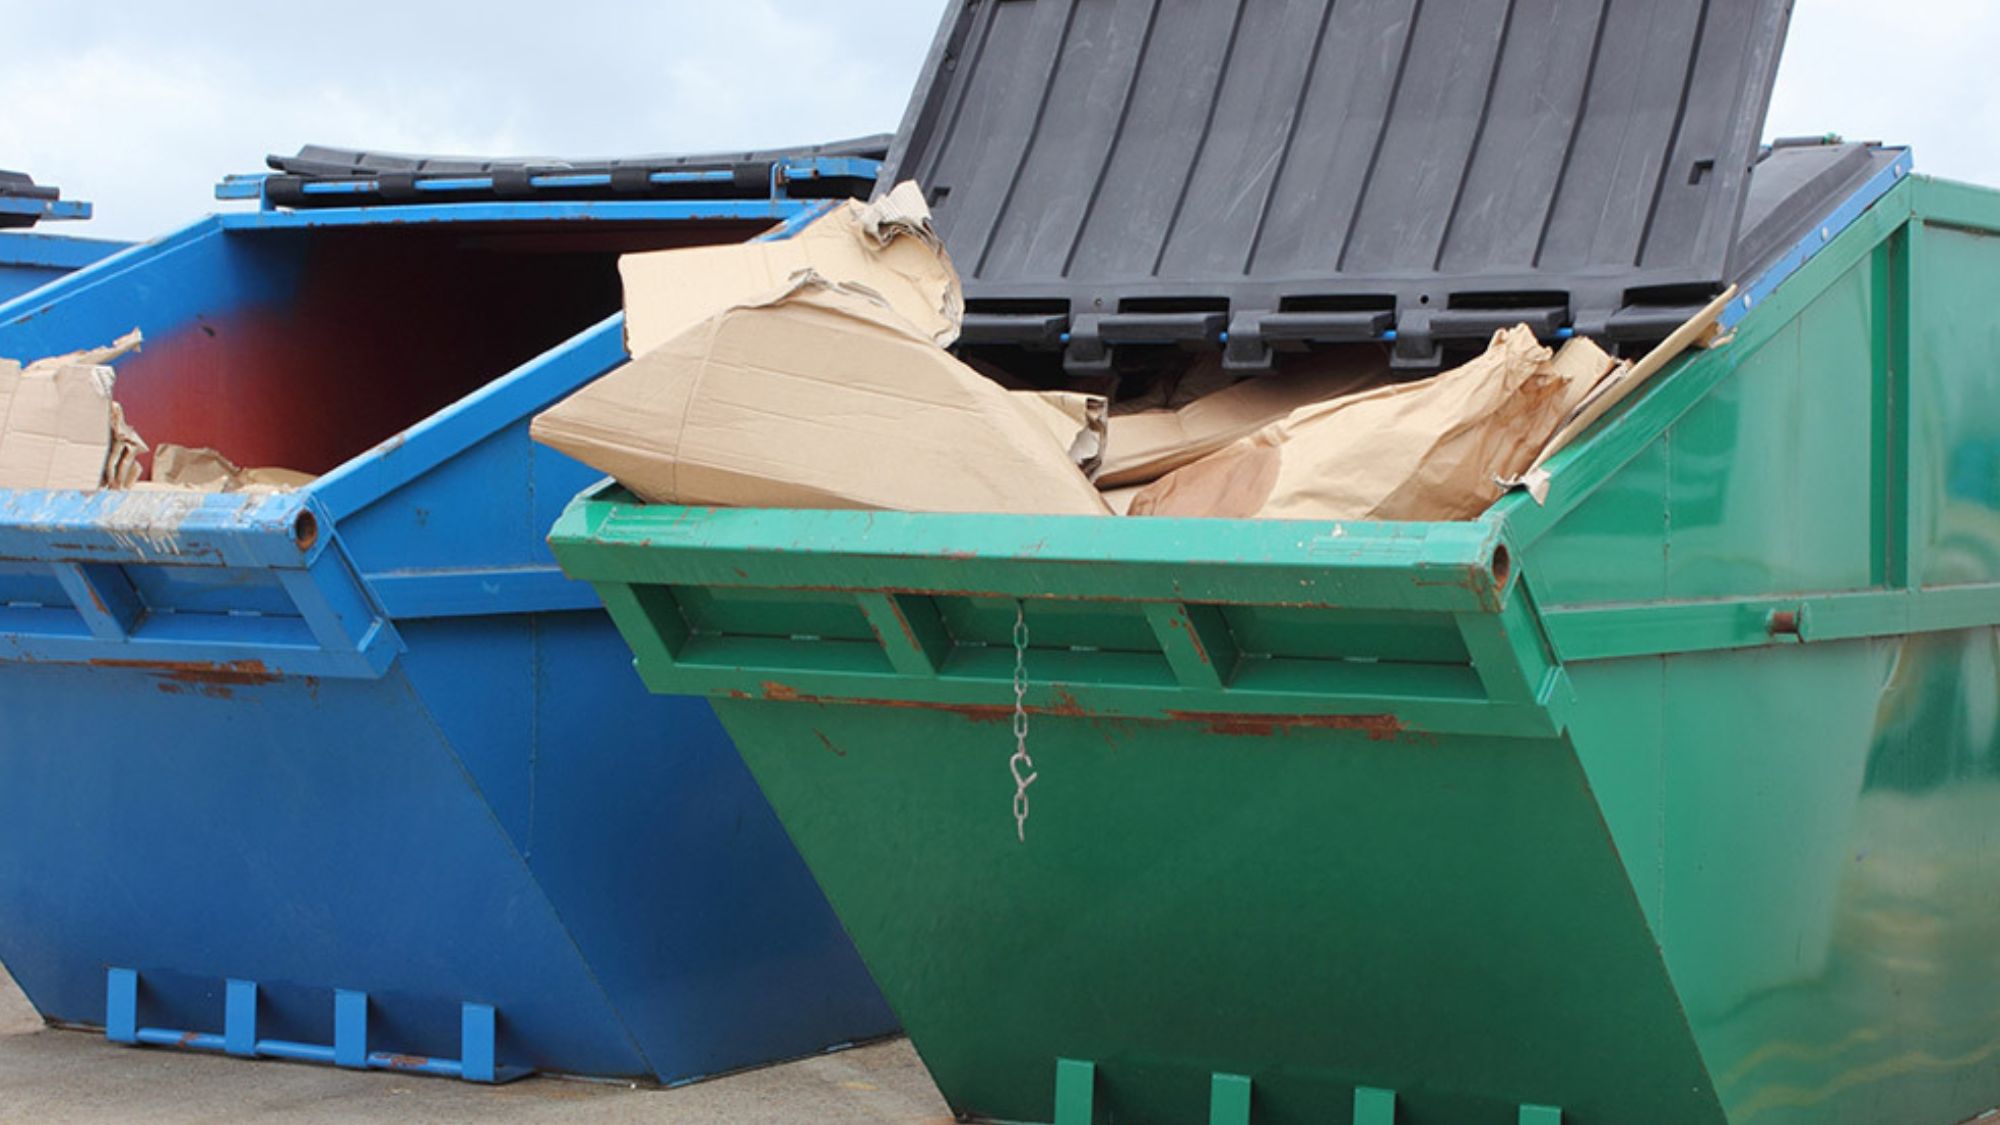 Two dumpsters in blue and green colors filled with cardboard boxes, representing a diverse range of options in skip hire service